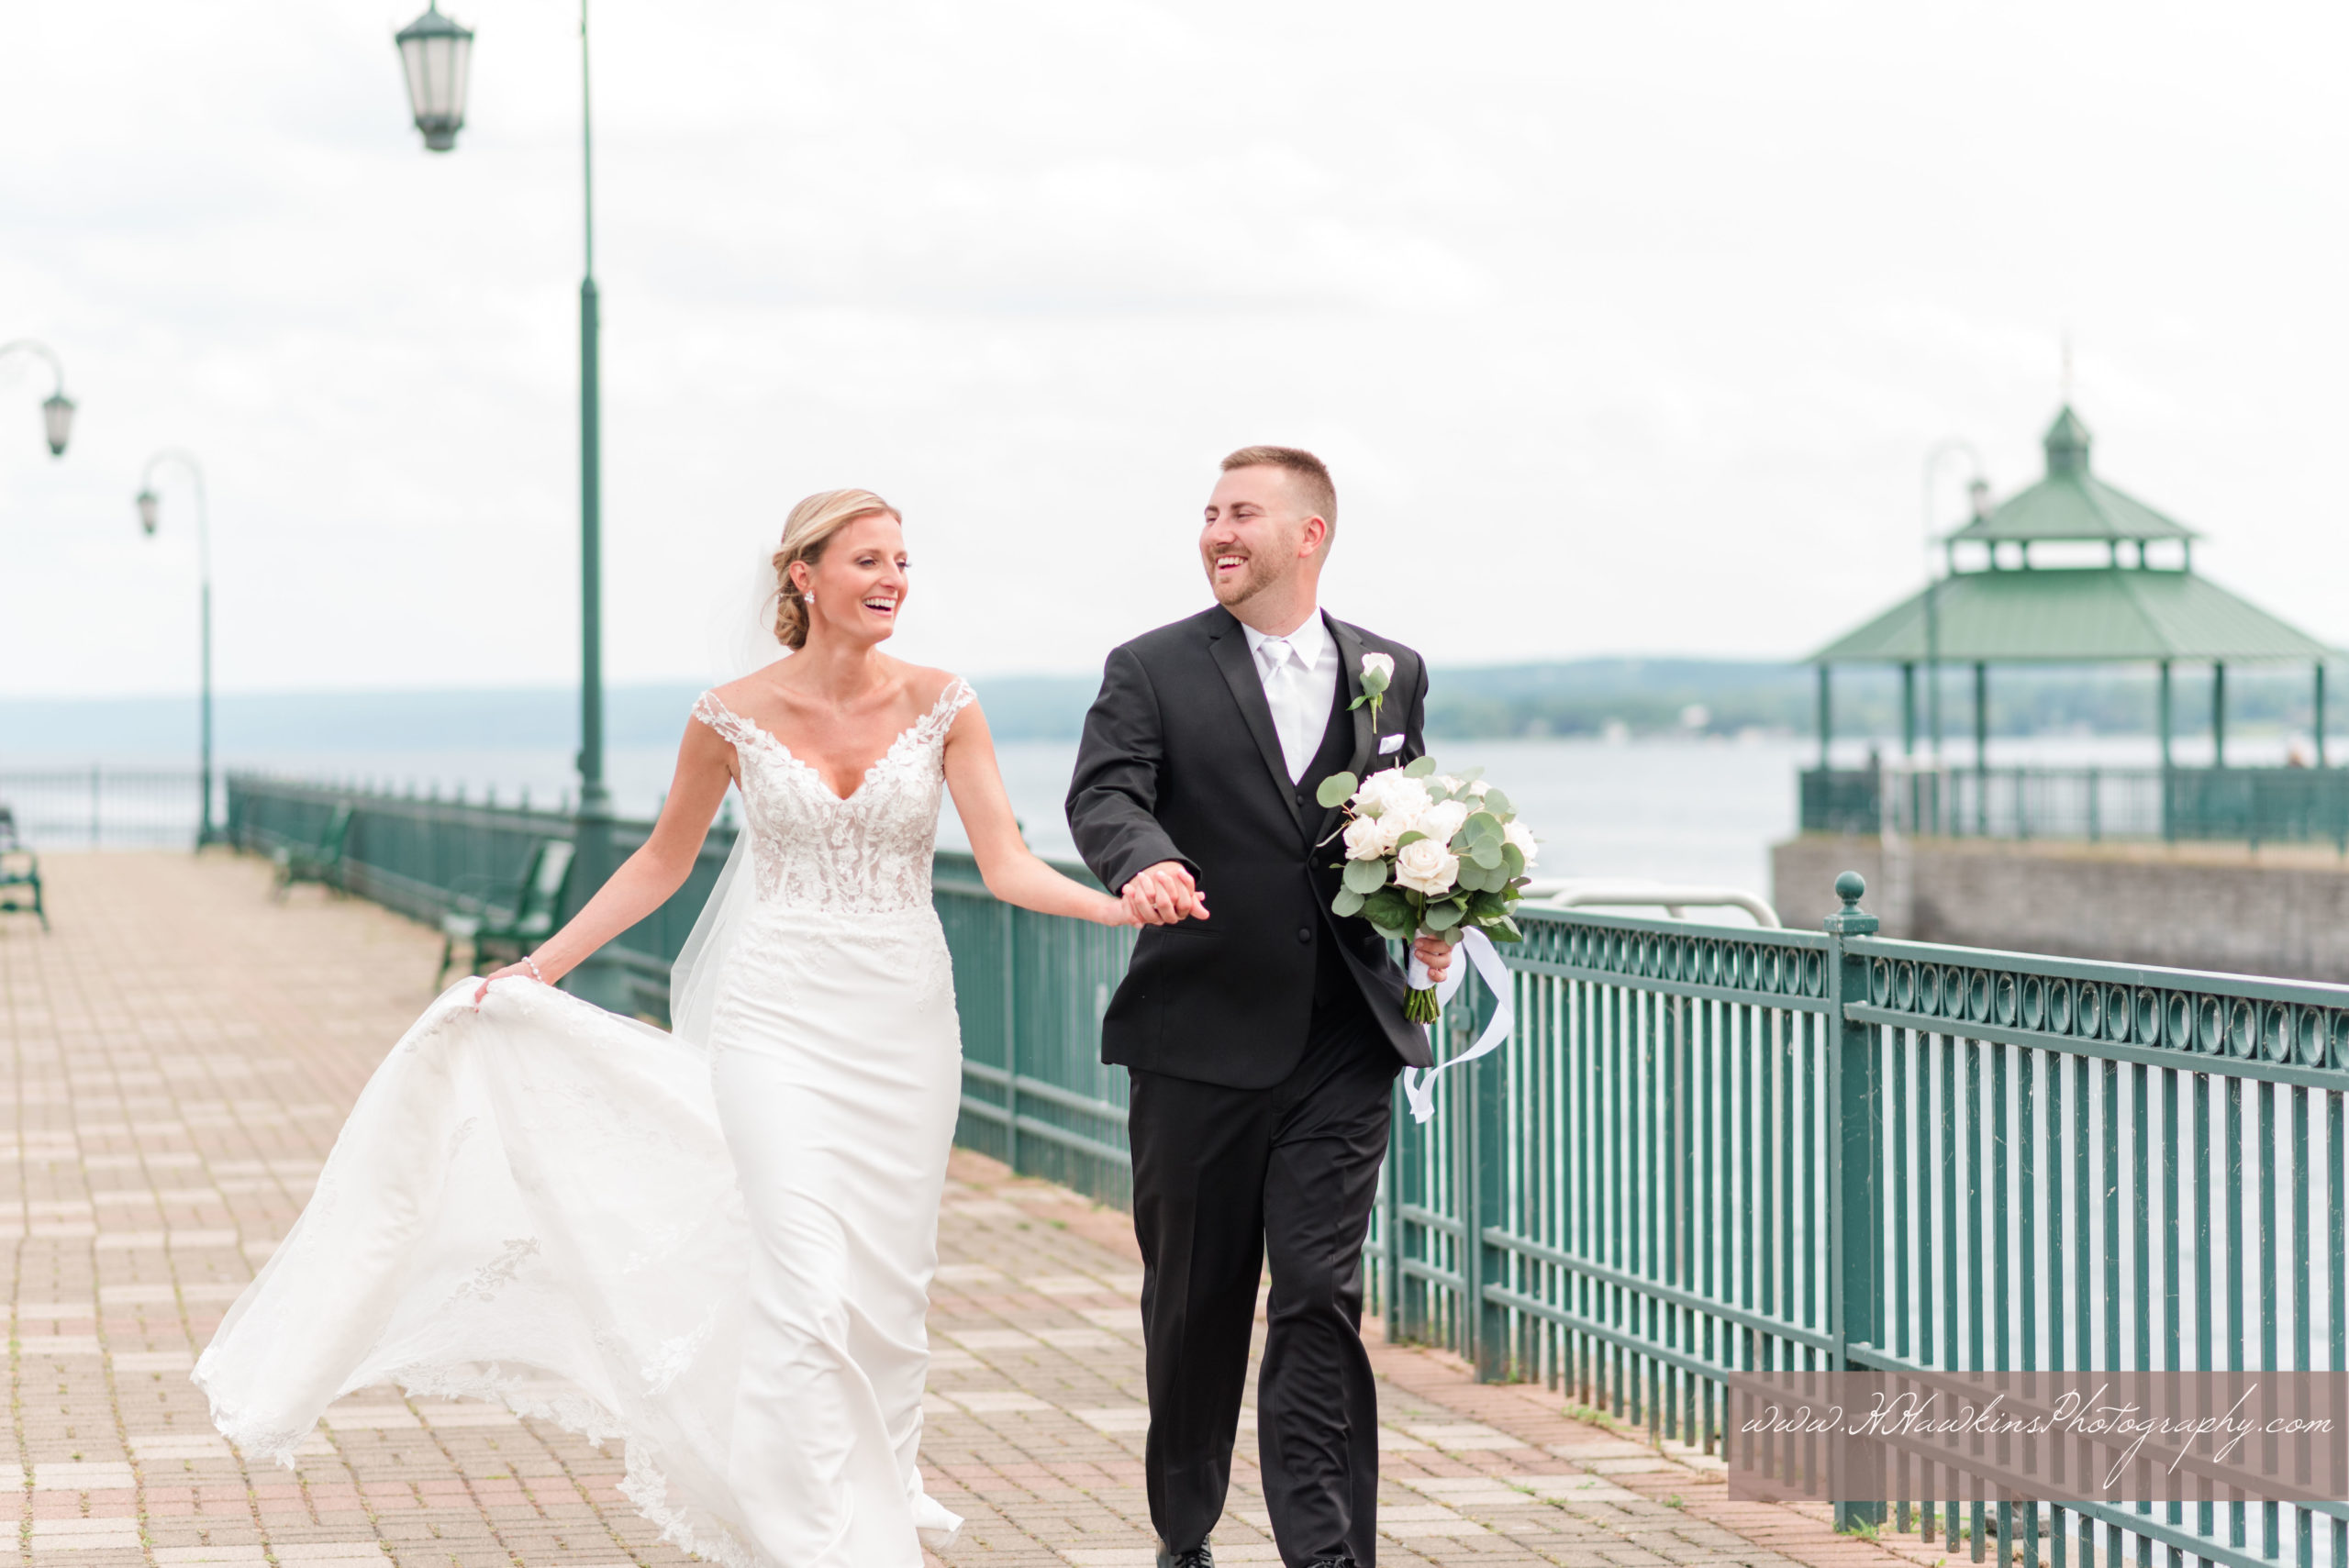 Bride and groom run together on the pier on Owasco Lake at Emerson park pavilion on their wedding day